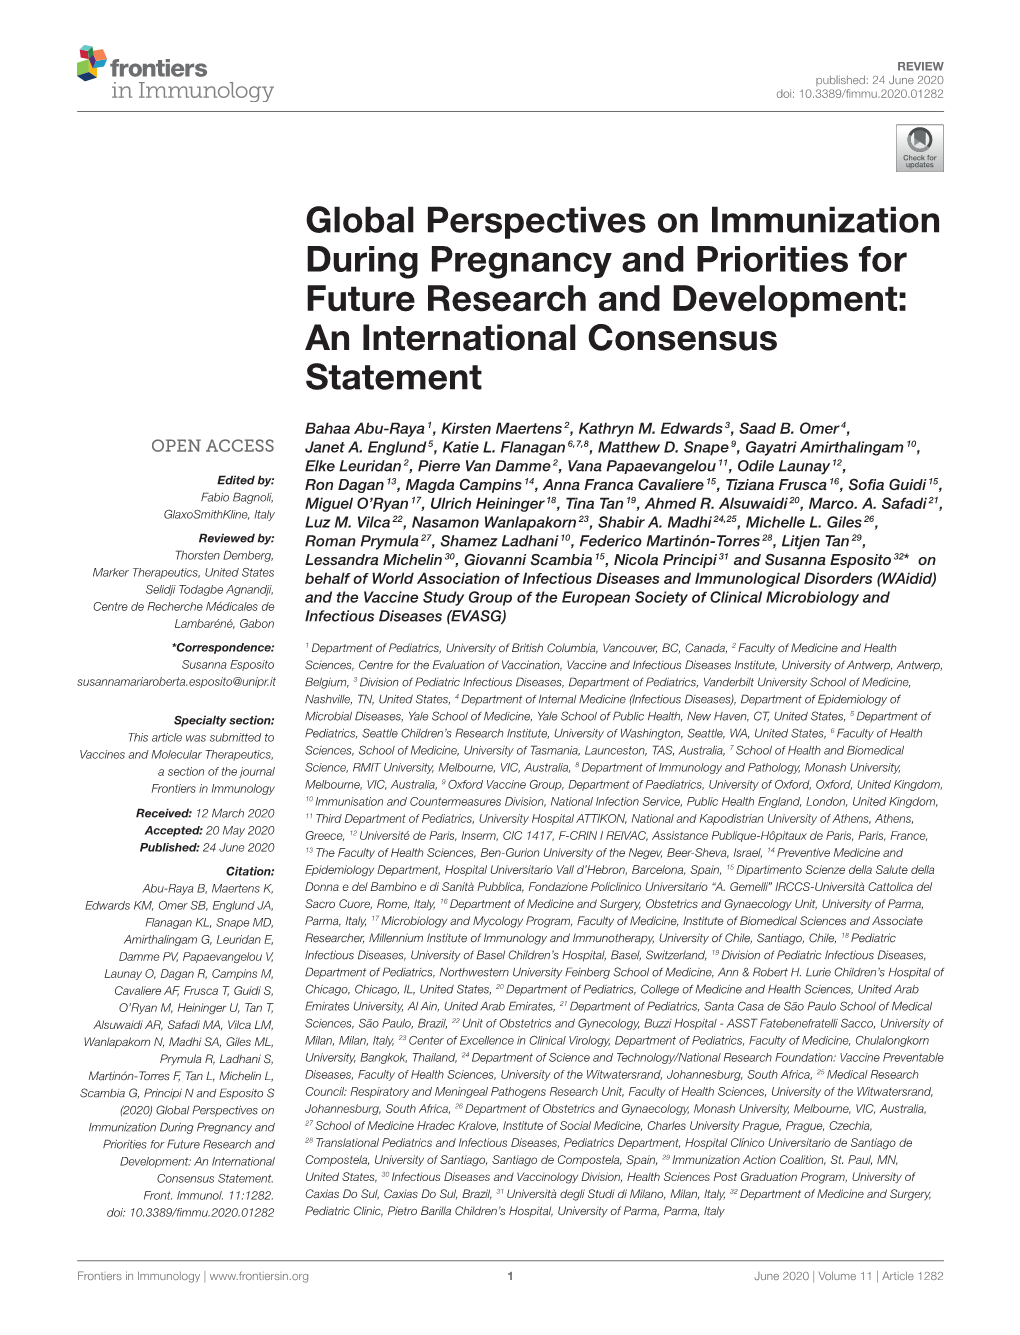 Global Perspectives on Immunization During Pregnancy and Priorities for Future Research and Development: an International Consensus Statement